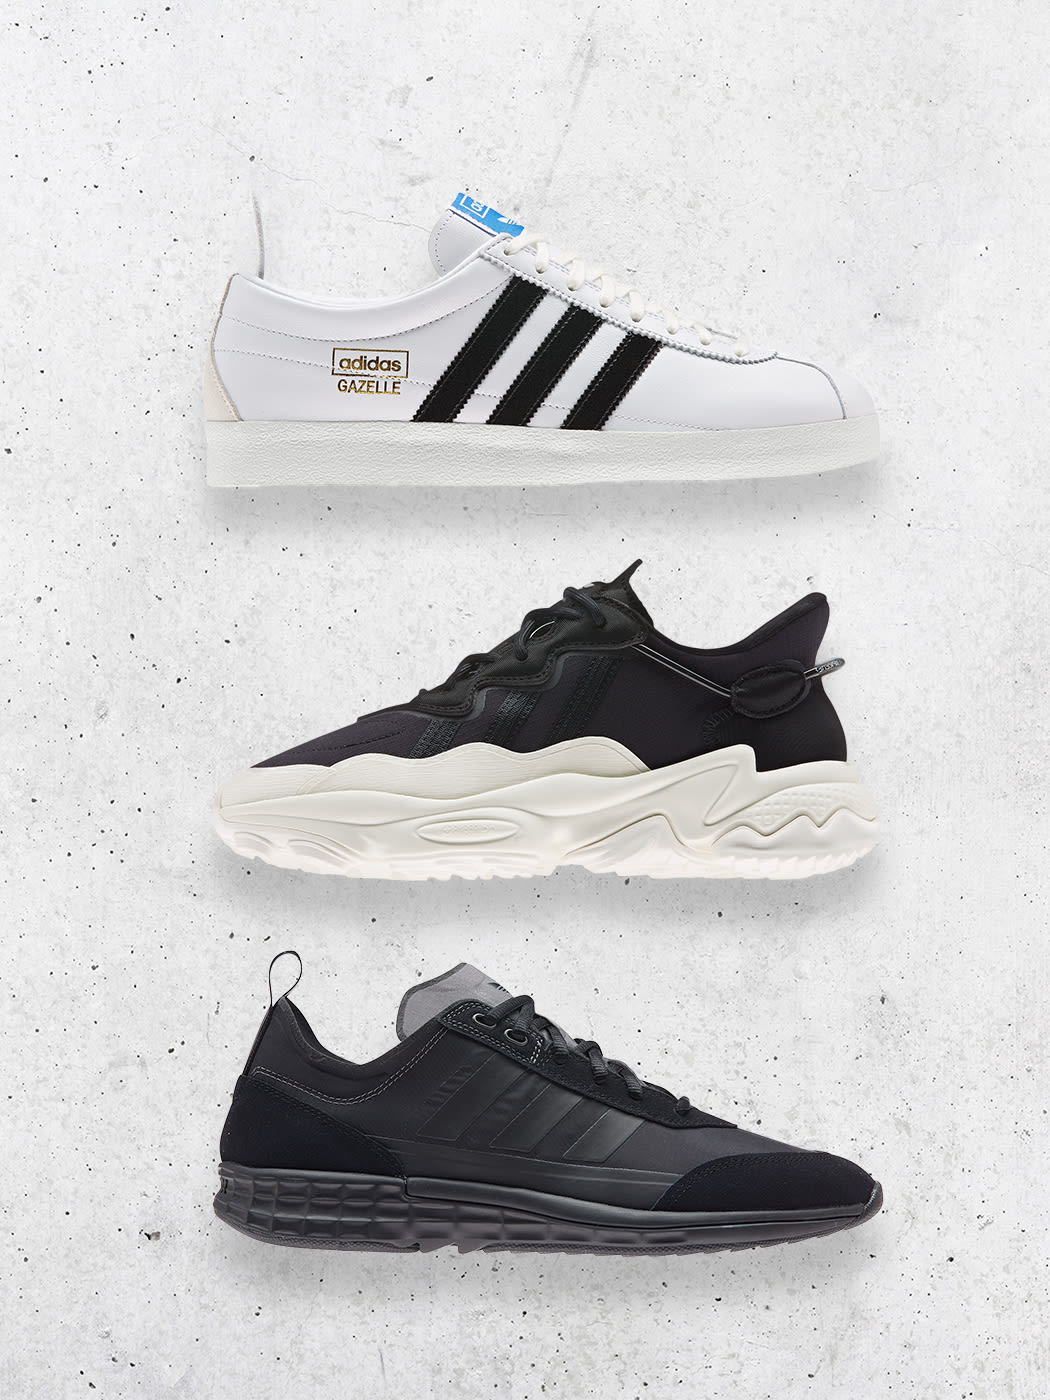 adidas official site